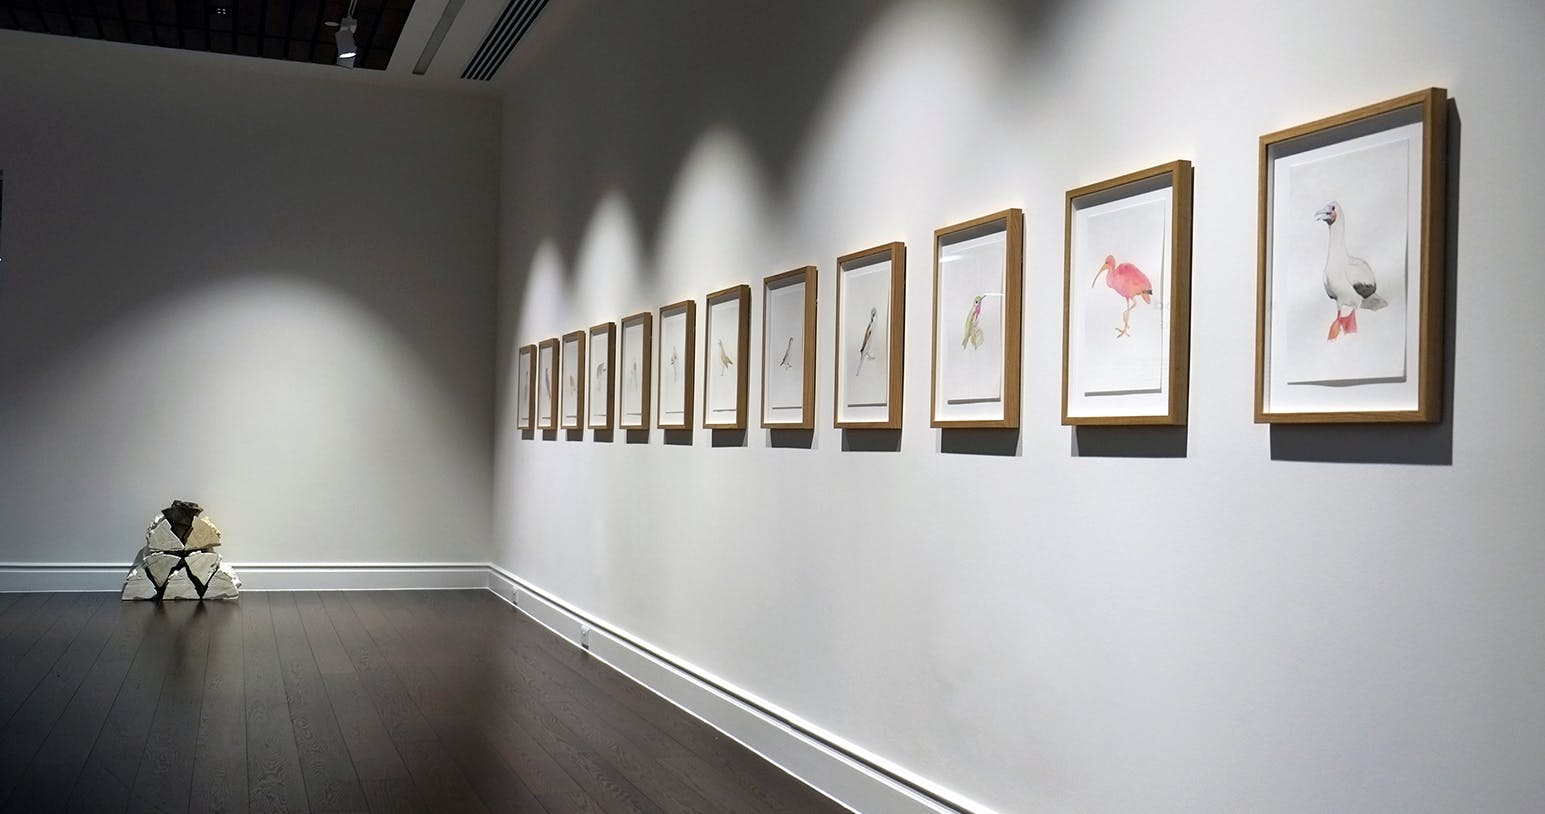 Twelve framed small scale paintings hang in a vertical line on a gallery wall. The watercolours depict various migratory birds. To the left, a pile of plaster cast wooden logs sit on the floor.